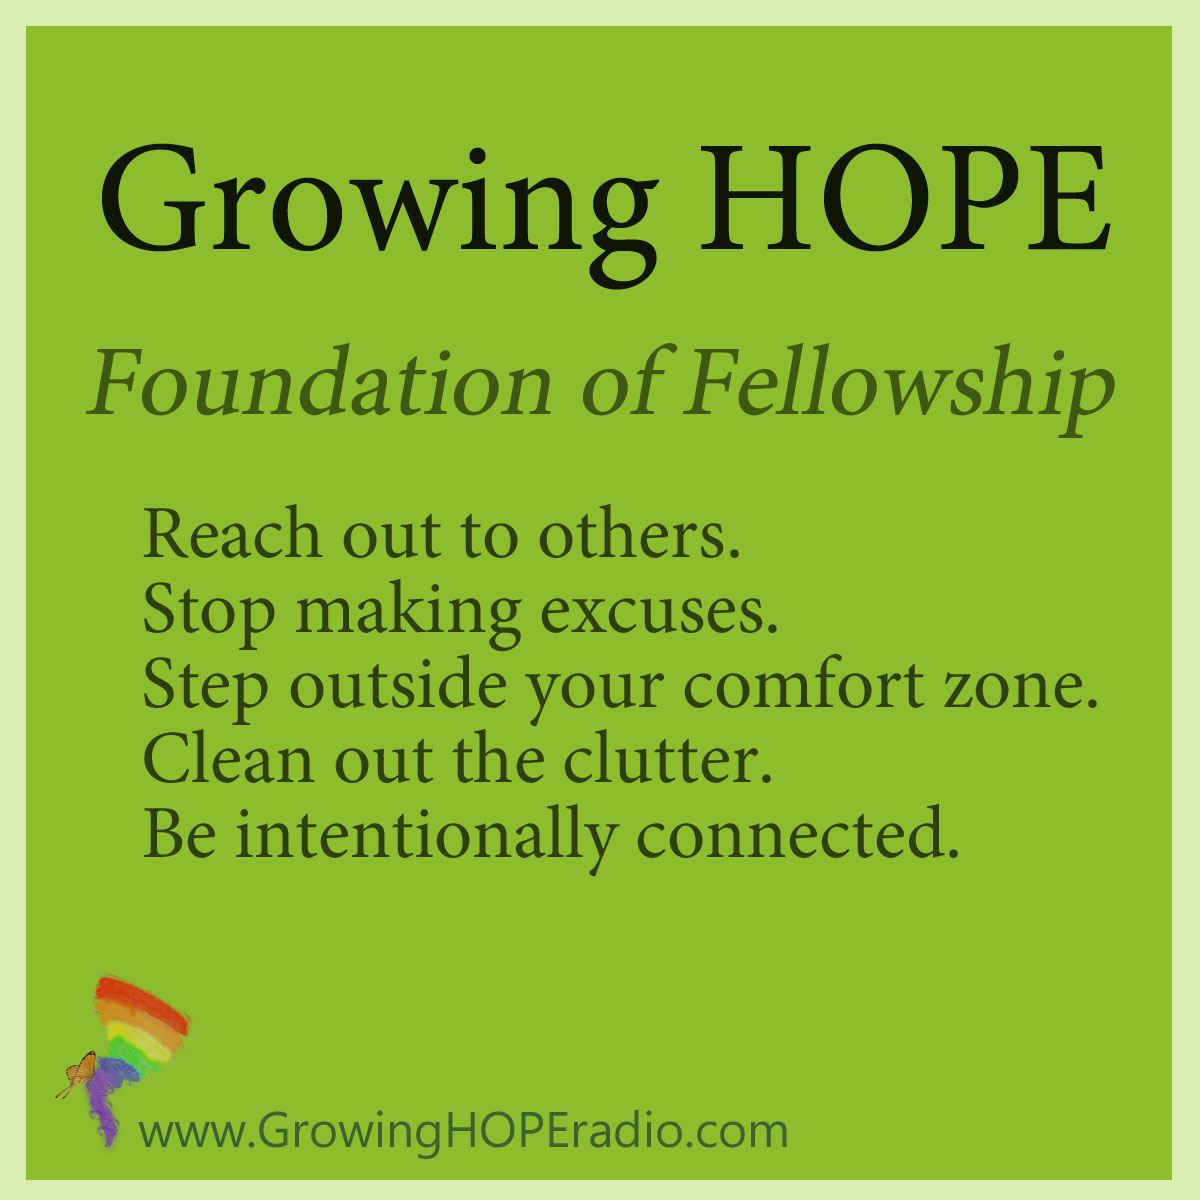 #GrowingHOPE - 5 points - foundation of fellowship